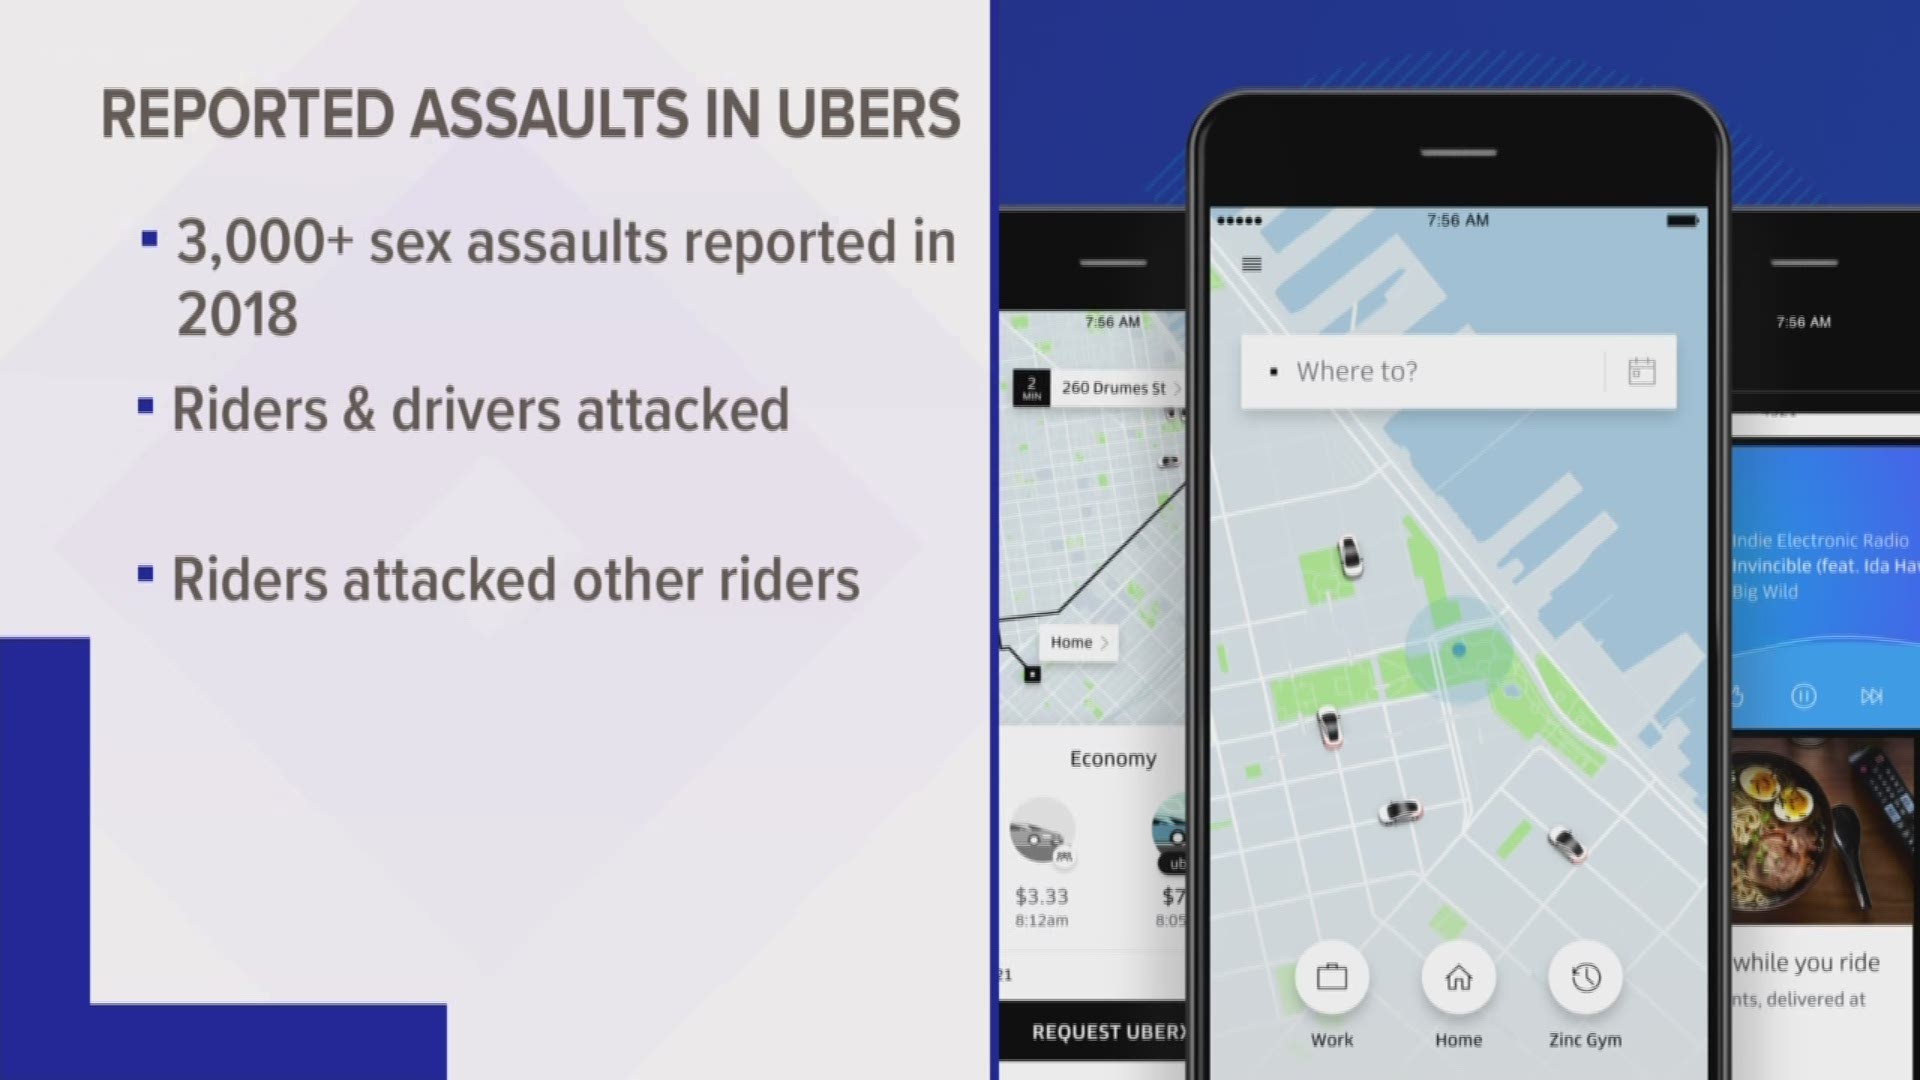 Uber riders reported more than 3,000 sexual assaults in 2018 kvue